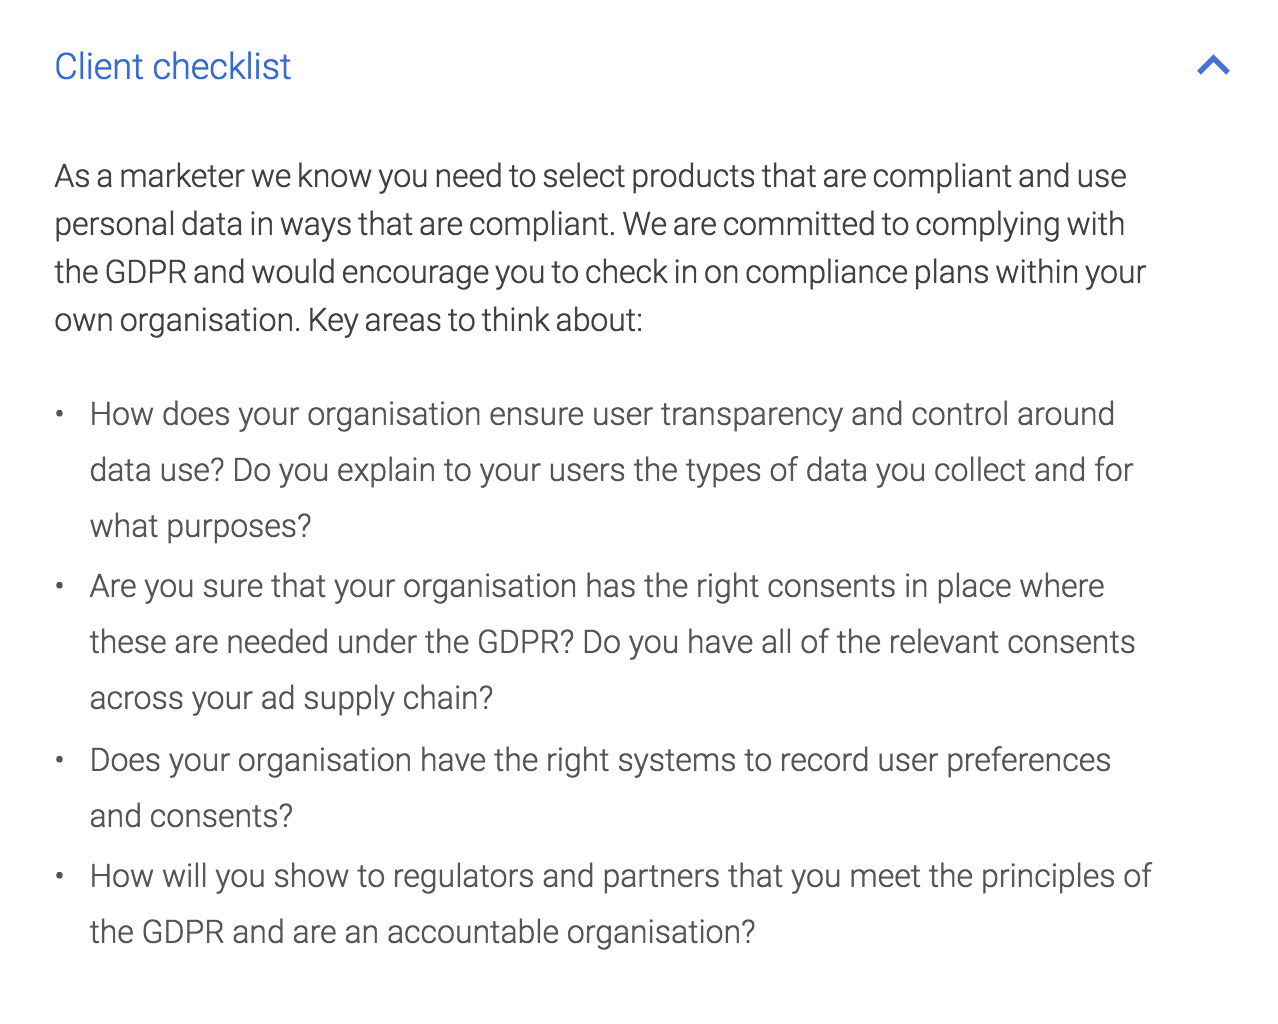 Client Checklist: As a marketer we know you need to select products that are compliant and use personal data in ways that are compliant. We are committed to complying with the GDPR and would encourage you to check in on compliance plans within your own organisation. Key areas to think about: How does your organisation ensure user transparency and control around data use? Do you explain to your users the types of data you collect and for what purposes? Are you sure that your organisation has the right consents in place where these are needed under the GDPR? Do you have all of the relevant consents across your ad supply chain? Does your organisation have the right systems to record user preferences and consents? How will you show to regulators and partners that you meet the principles of the GDPR and are an accountable organisation?